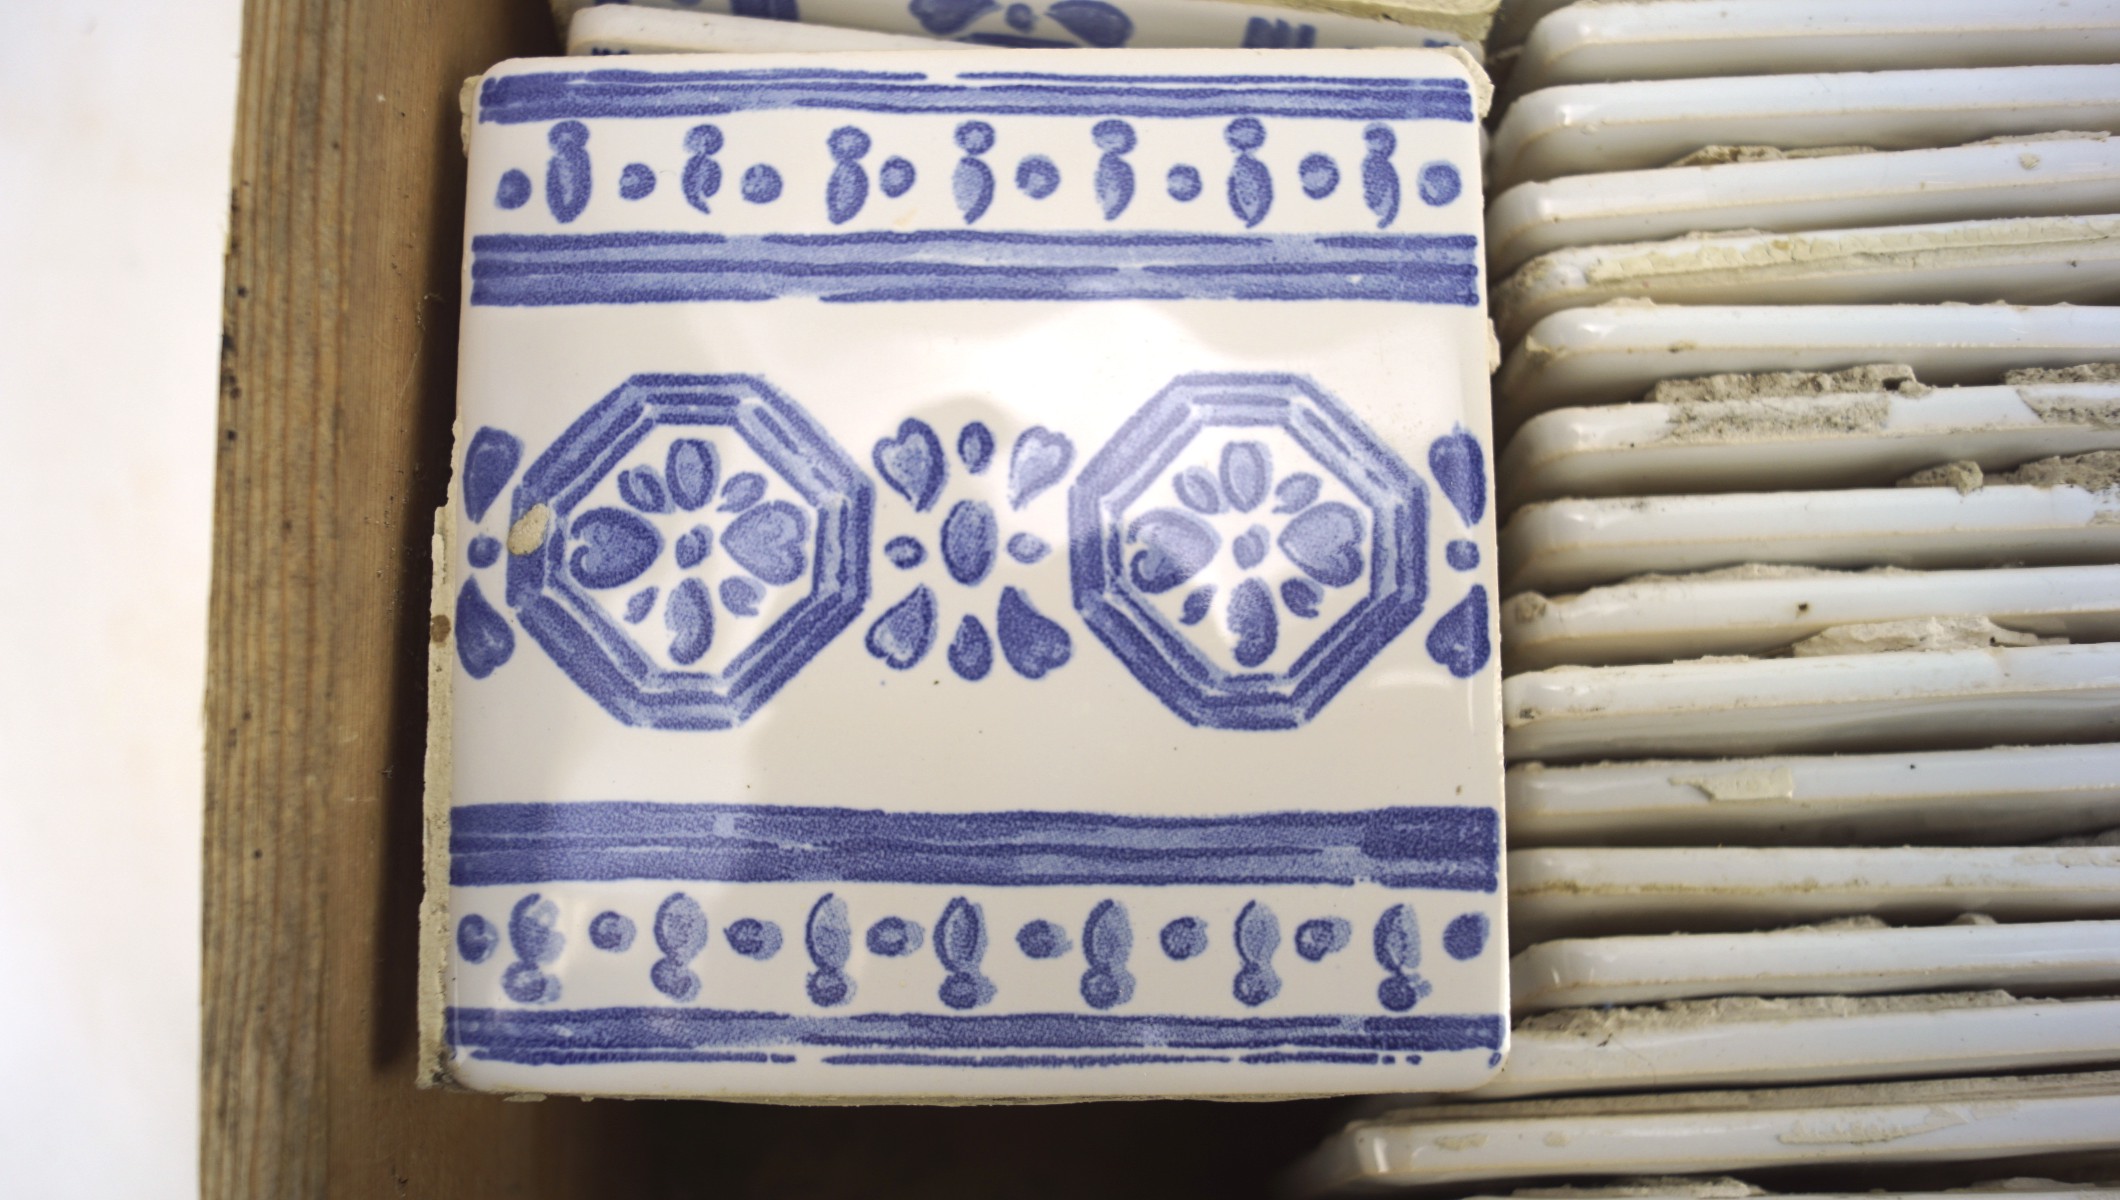 An extensive collection of Pilkington ceramic wall tiles, some having blue geometric decoration, - Image 2 of 3